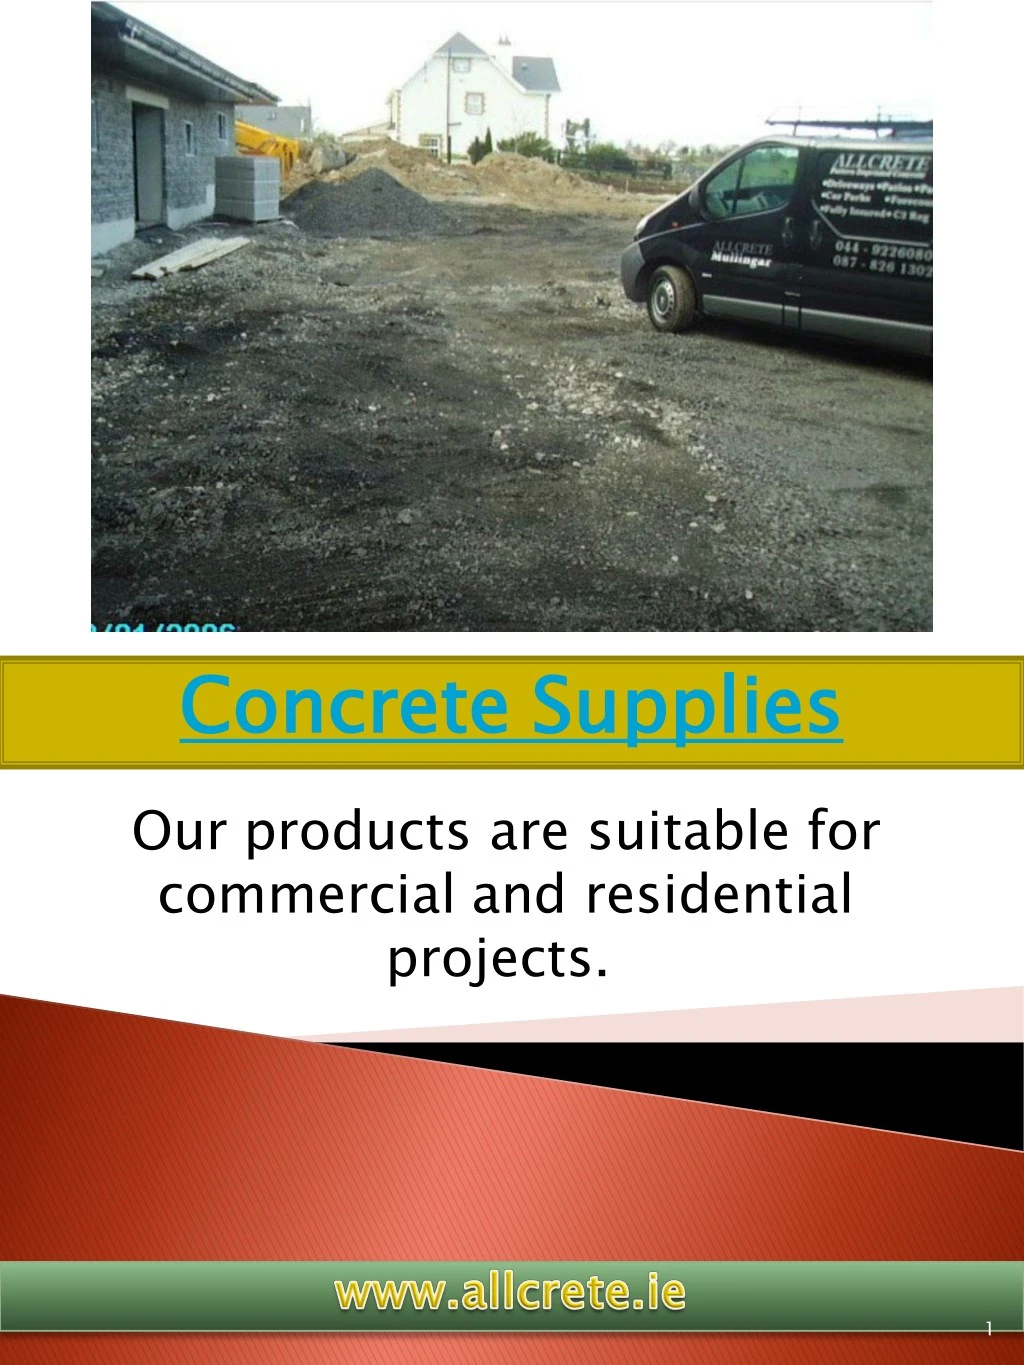 concrete supplies our products are suitable